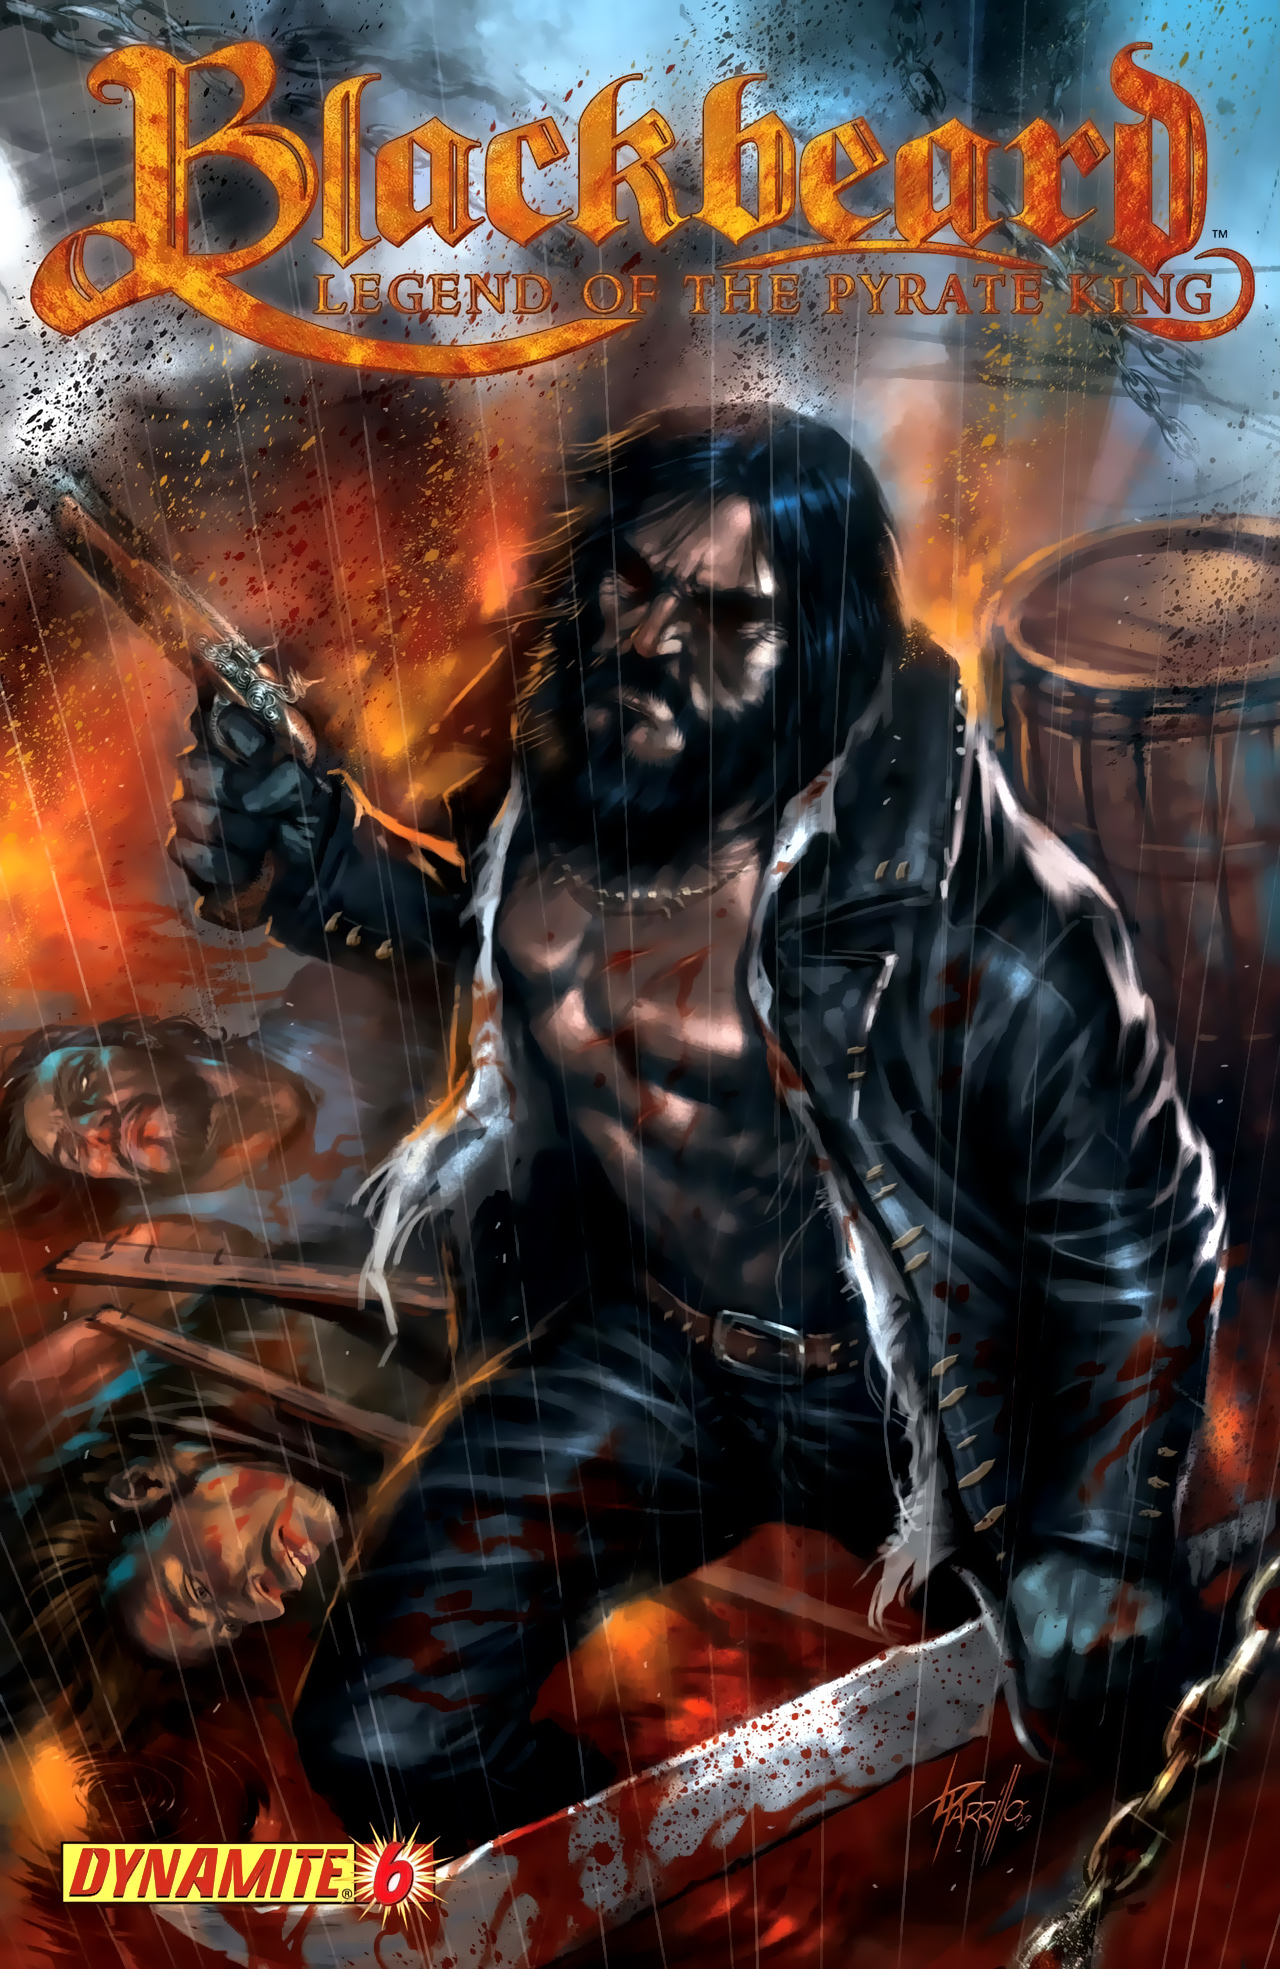 Read online Blackbeard: Legend of the Pyrate King comic -  Issue #6 - 1